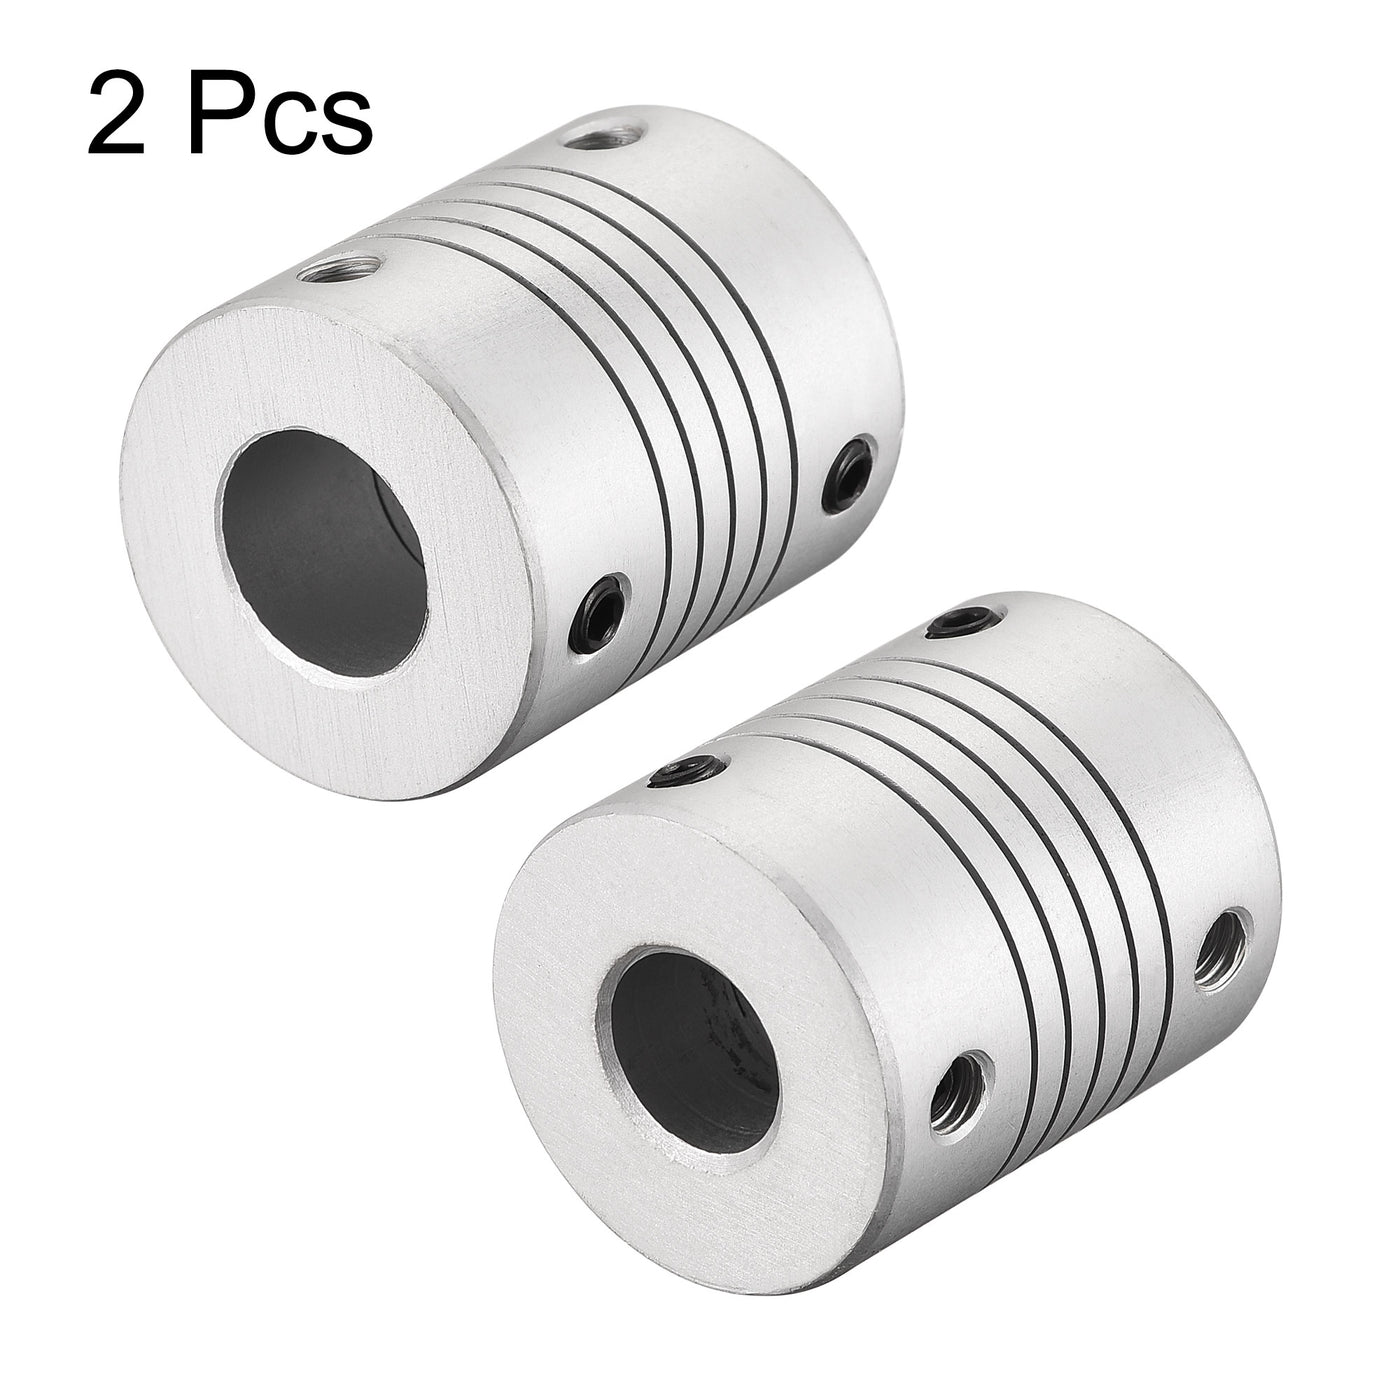 uxcell Uxcell 12mm to 10mm Aluminum Alloy Shaft Coupling Flexible Coupler L30xD25 Silver 2Pcs